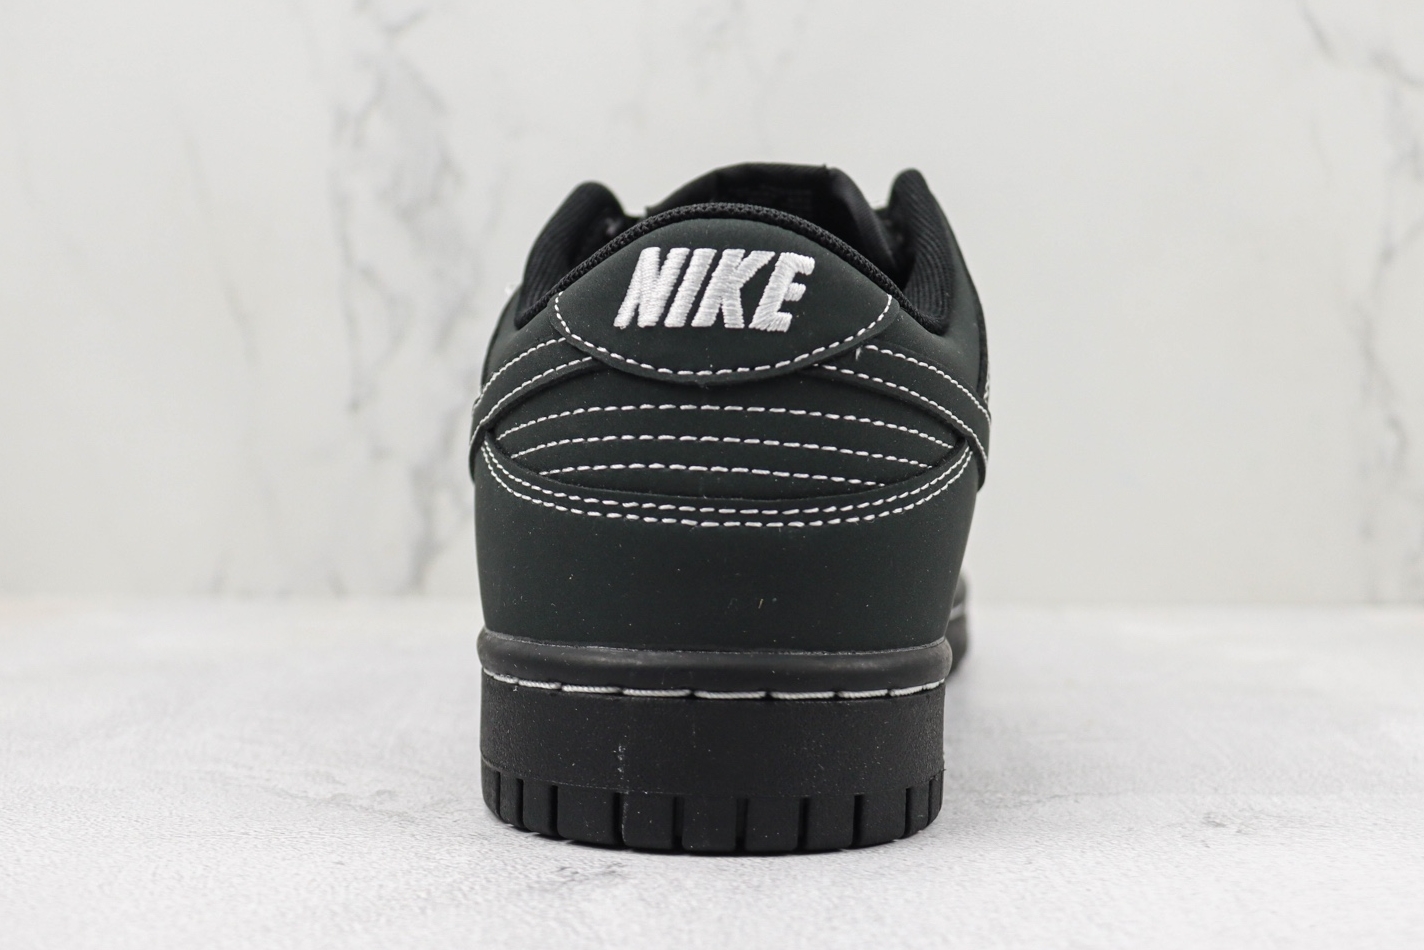 Nike SB Dunk Low Black White DF0517-221 - Iconic Style and Premium Quality Footwear